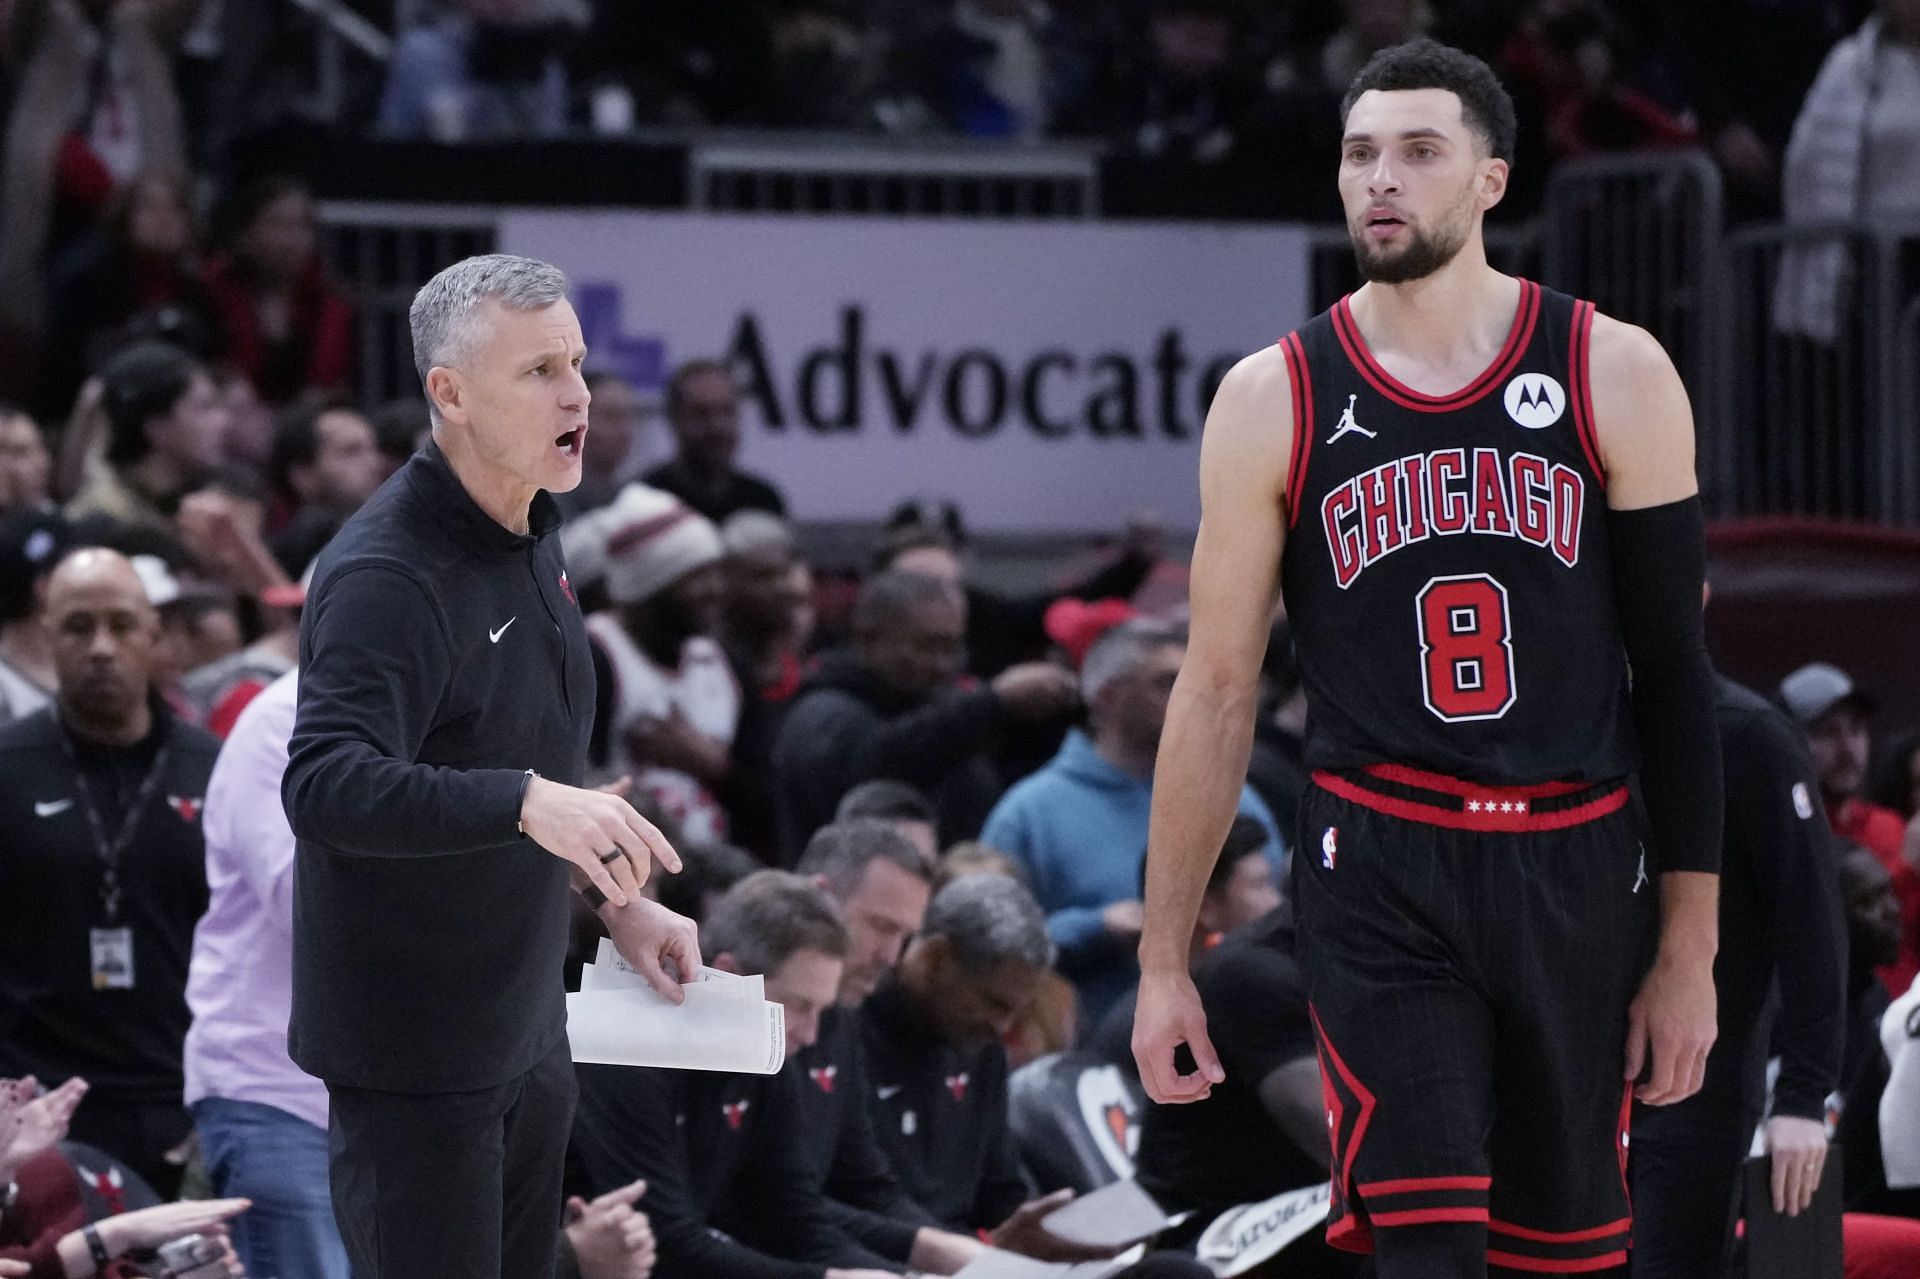 Is it possible for the Sacramento Kings to trade Harrison Barnes, Kevin Huerter and other assets to acquire Zach Lavine?